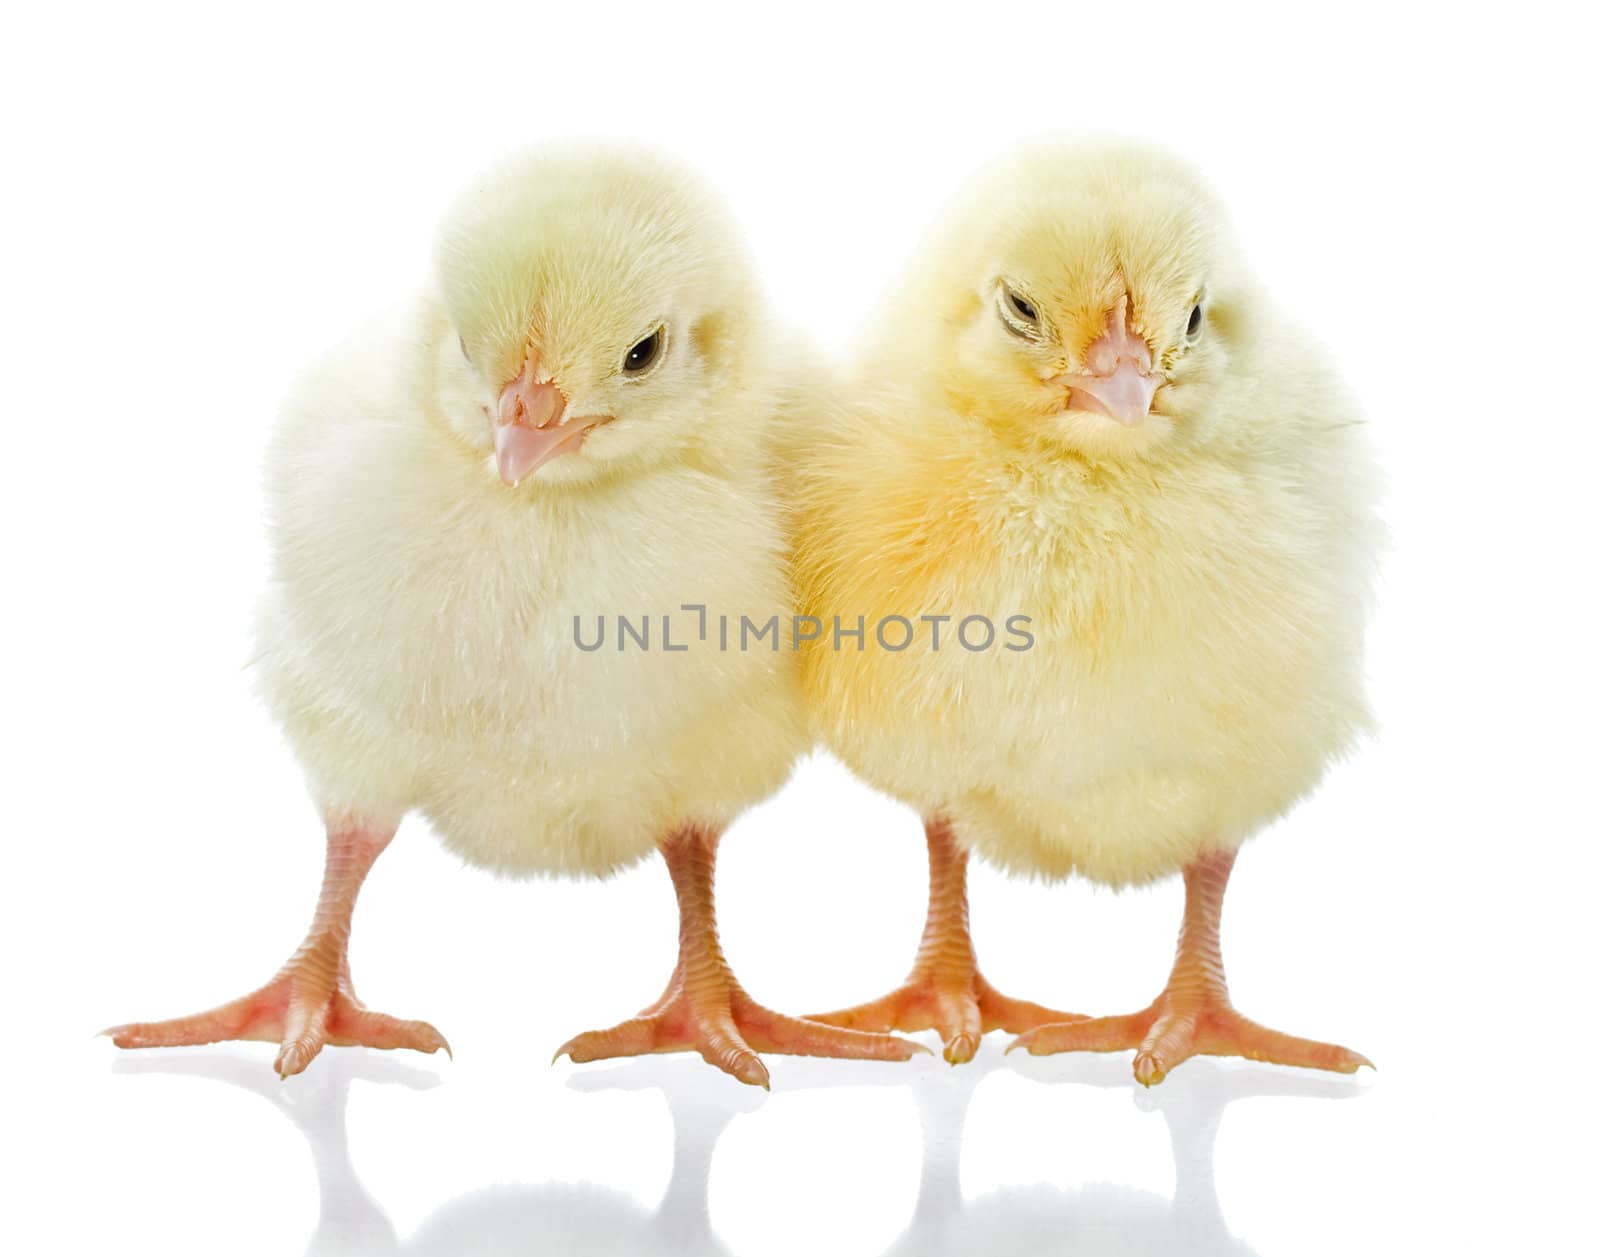 two small yellow chicks, isolated on white